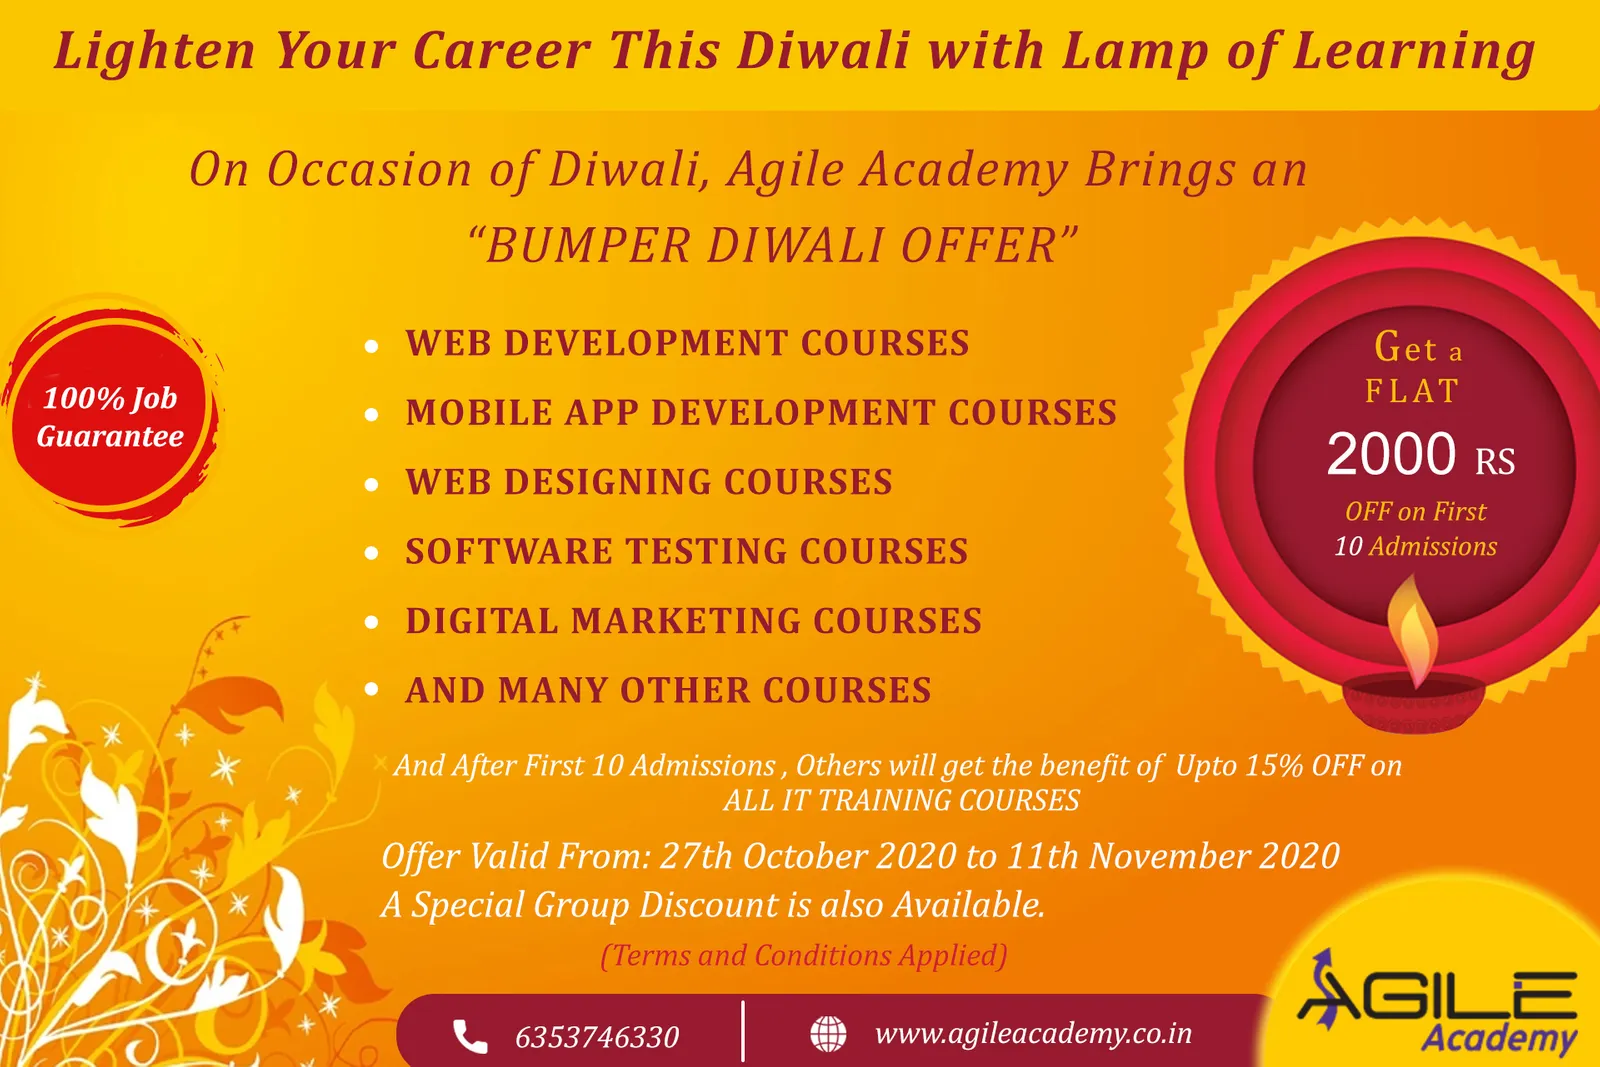 A Special Diwali Bumper Dhamaka Offers on All IT Training Courses at Agile Academy.